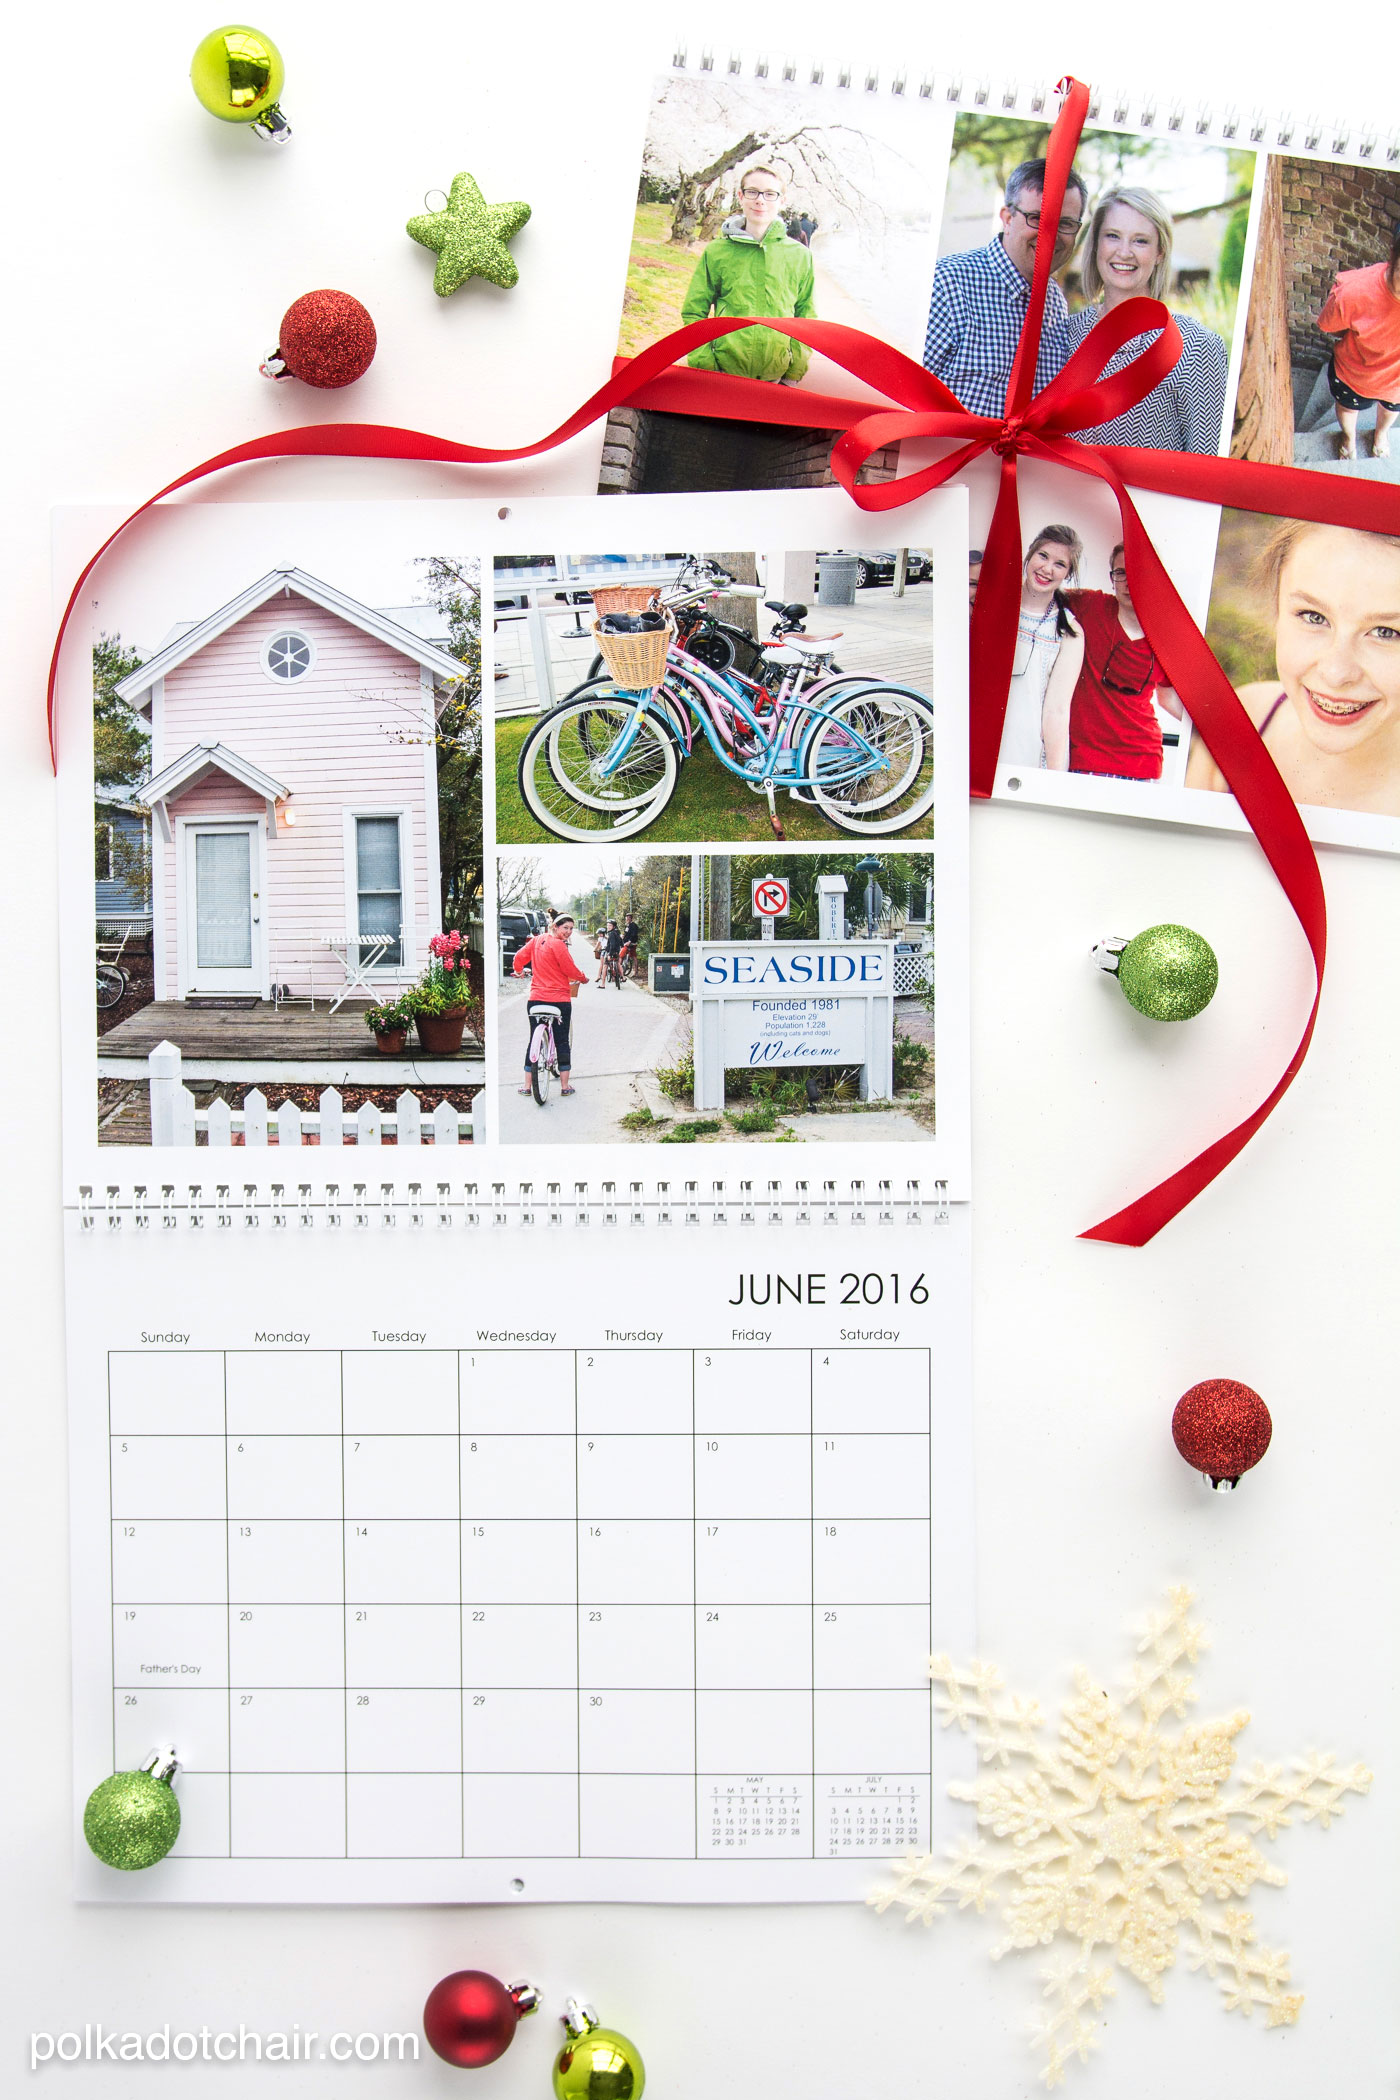 Create a "Favorite Places" calendar as a gift for far away family and friends. This would also be a nice grandparent gift